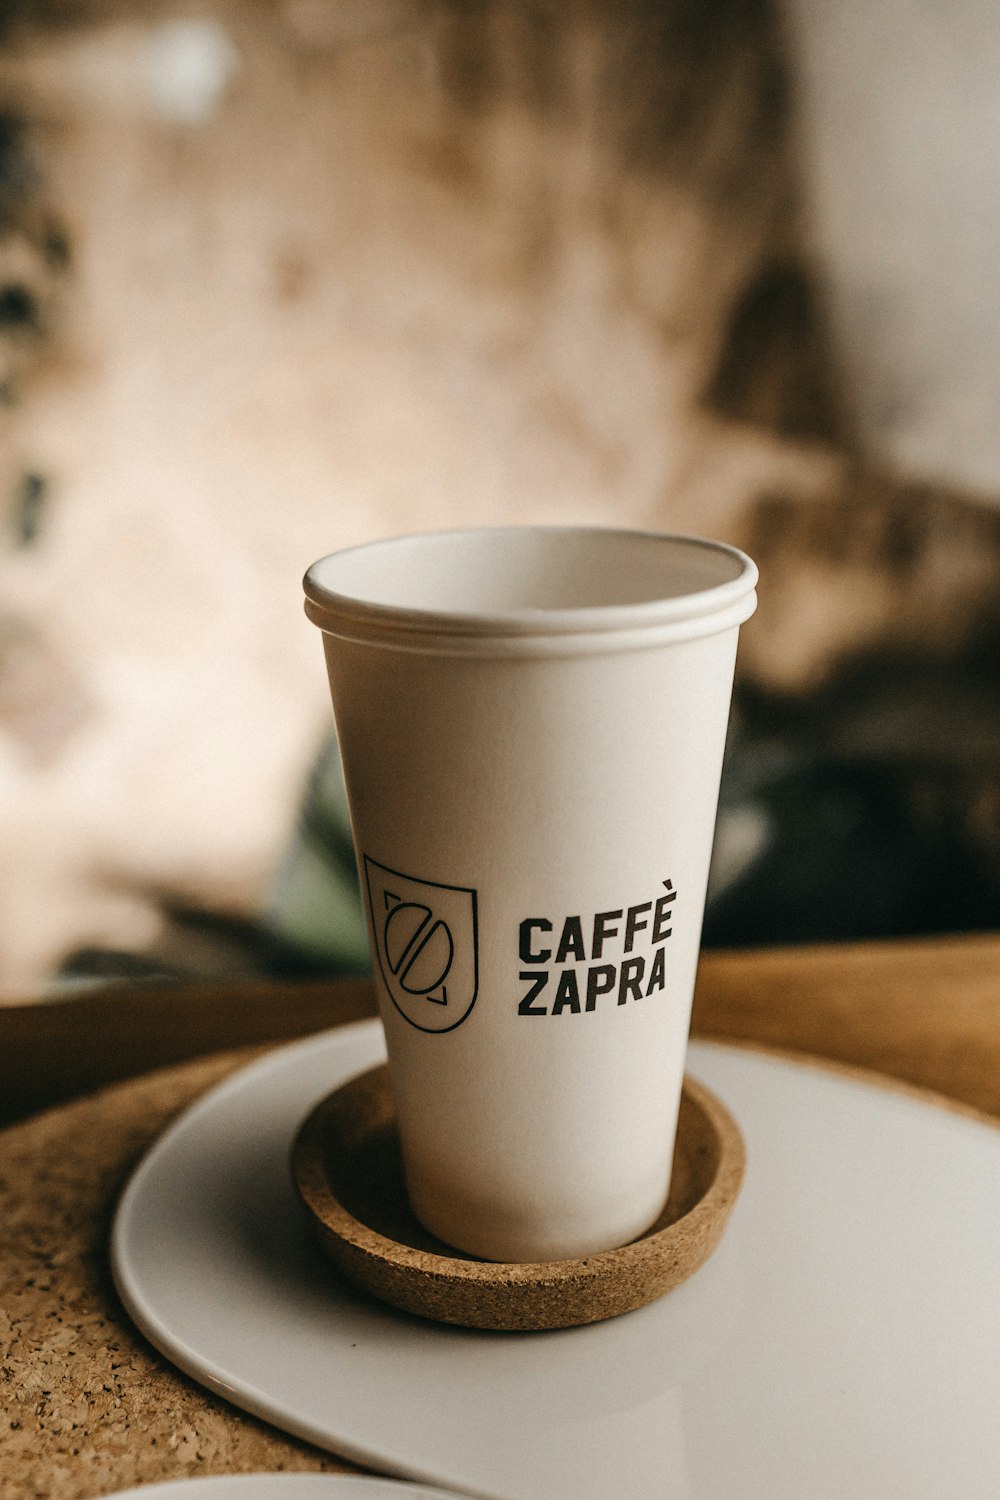 white and black Caffe Zapra cup on table